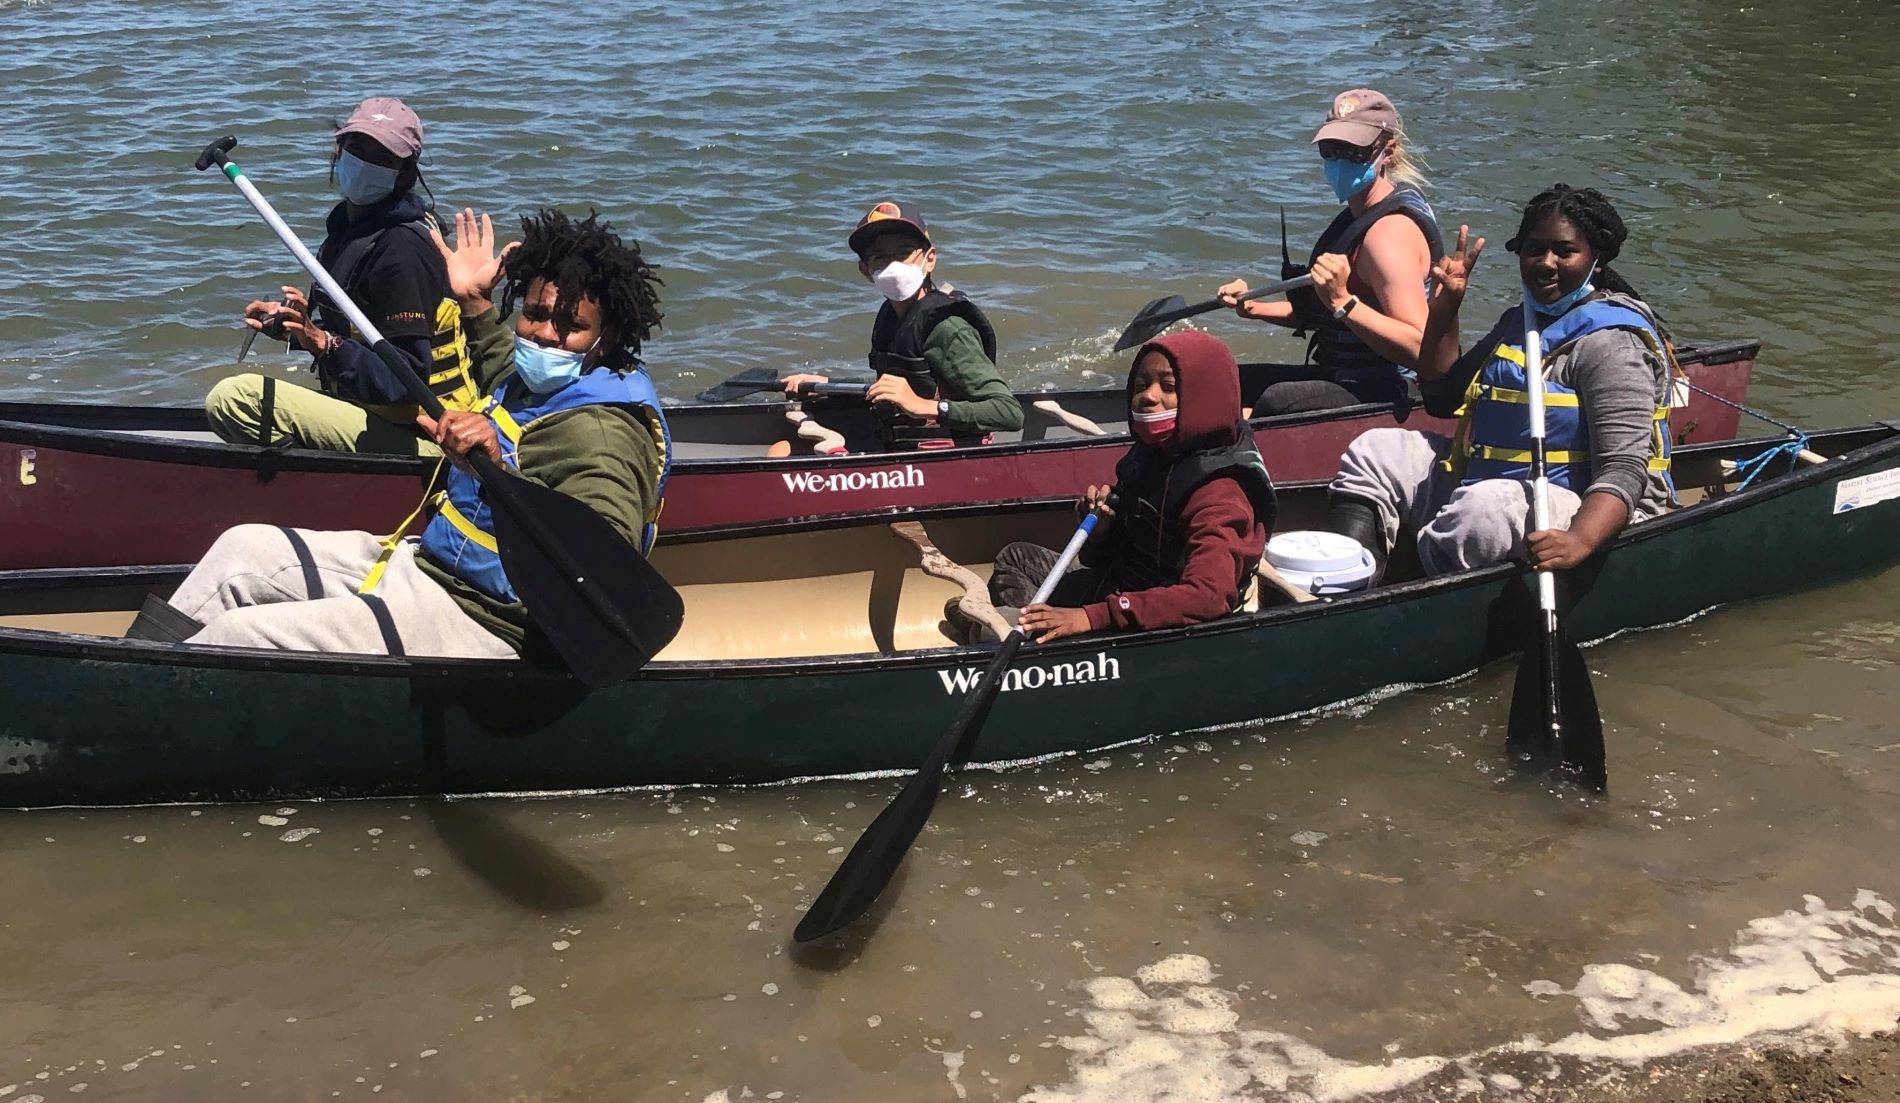 A group of youth and adults wave from a canoe